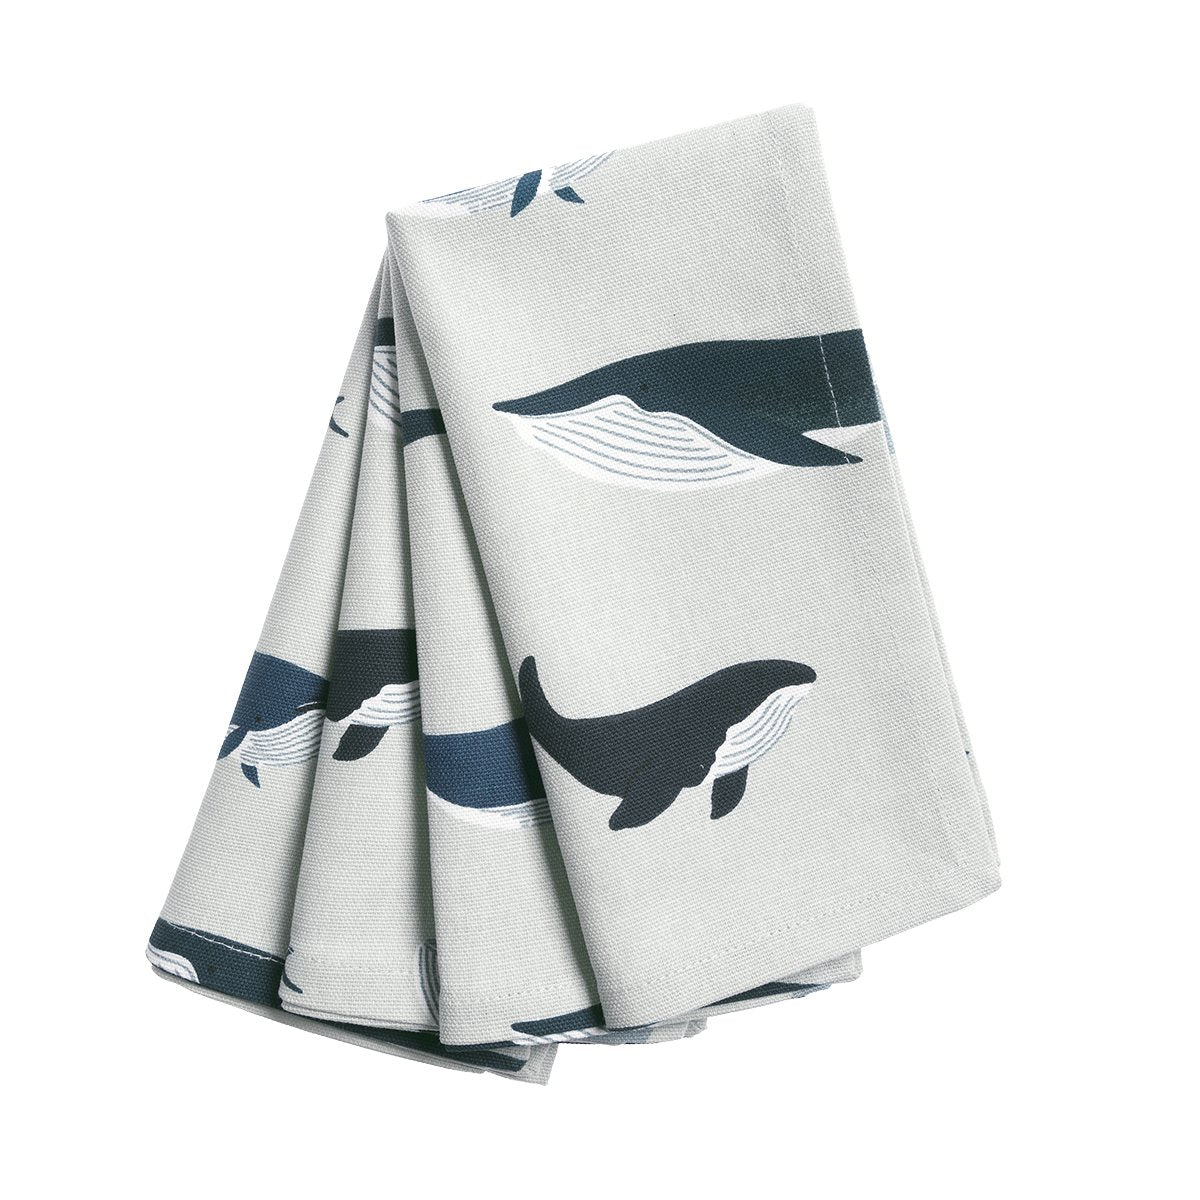 Whales Fabric Napkins (Set of 4) by Sophie Allport